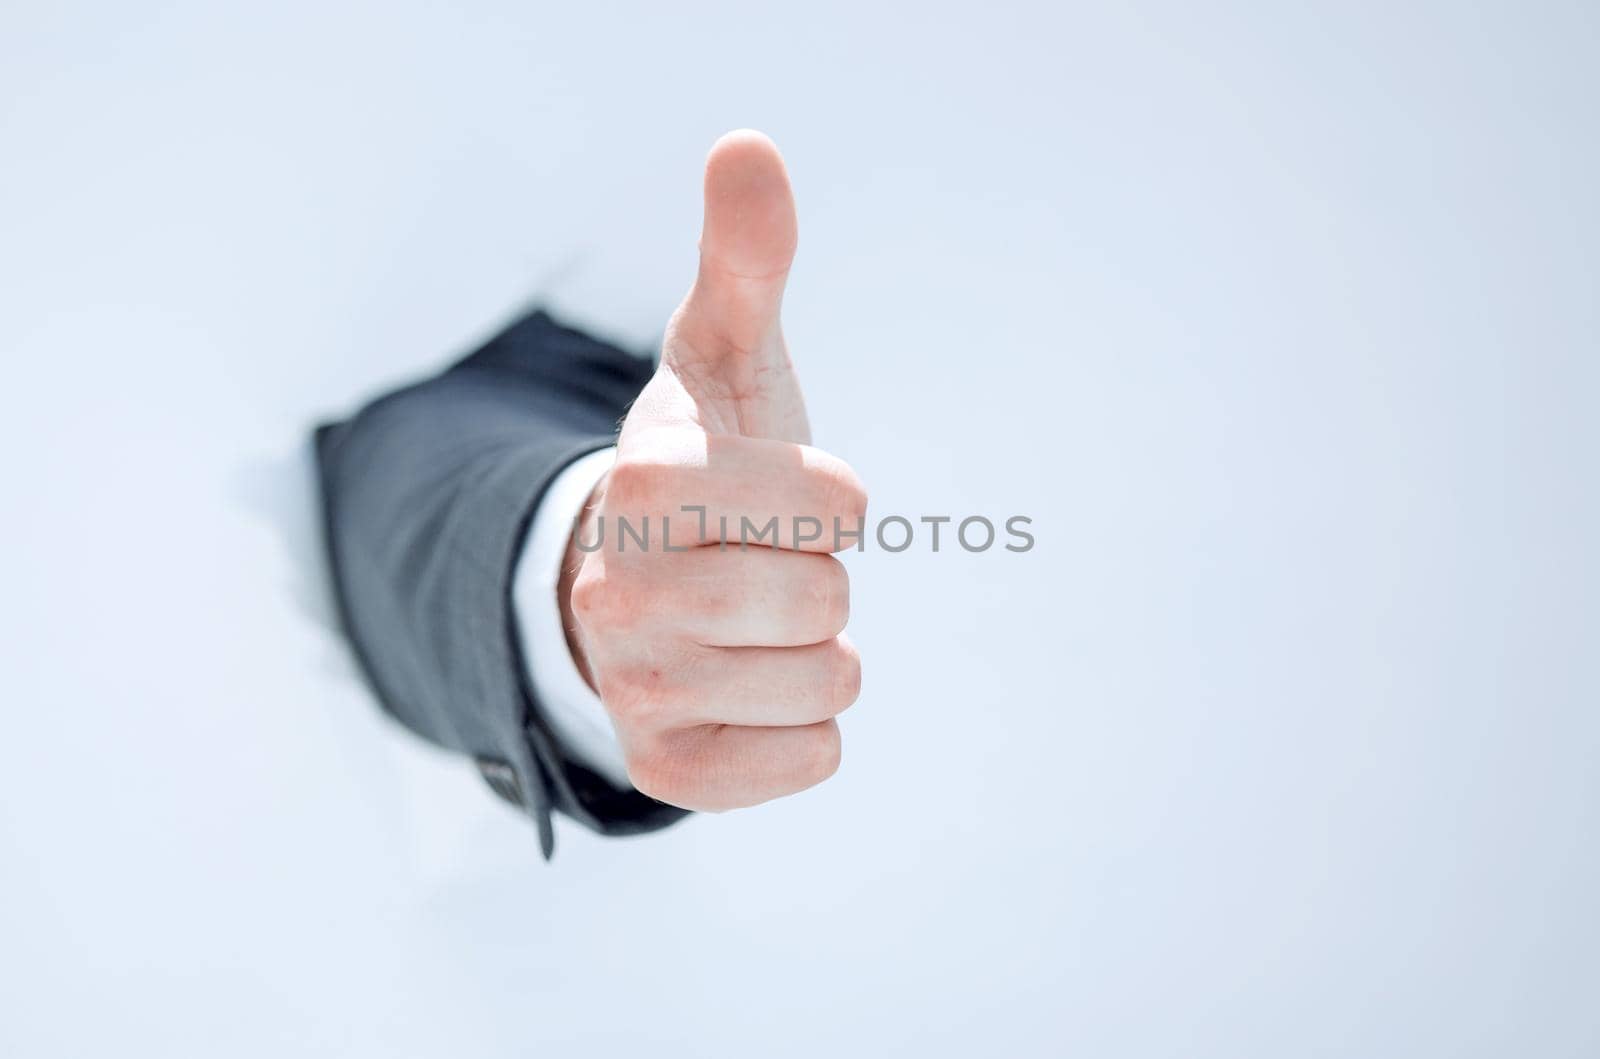 businessman breaks through the paper and shows his thumb up .photo with copy space